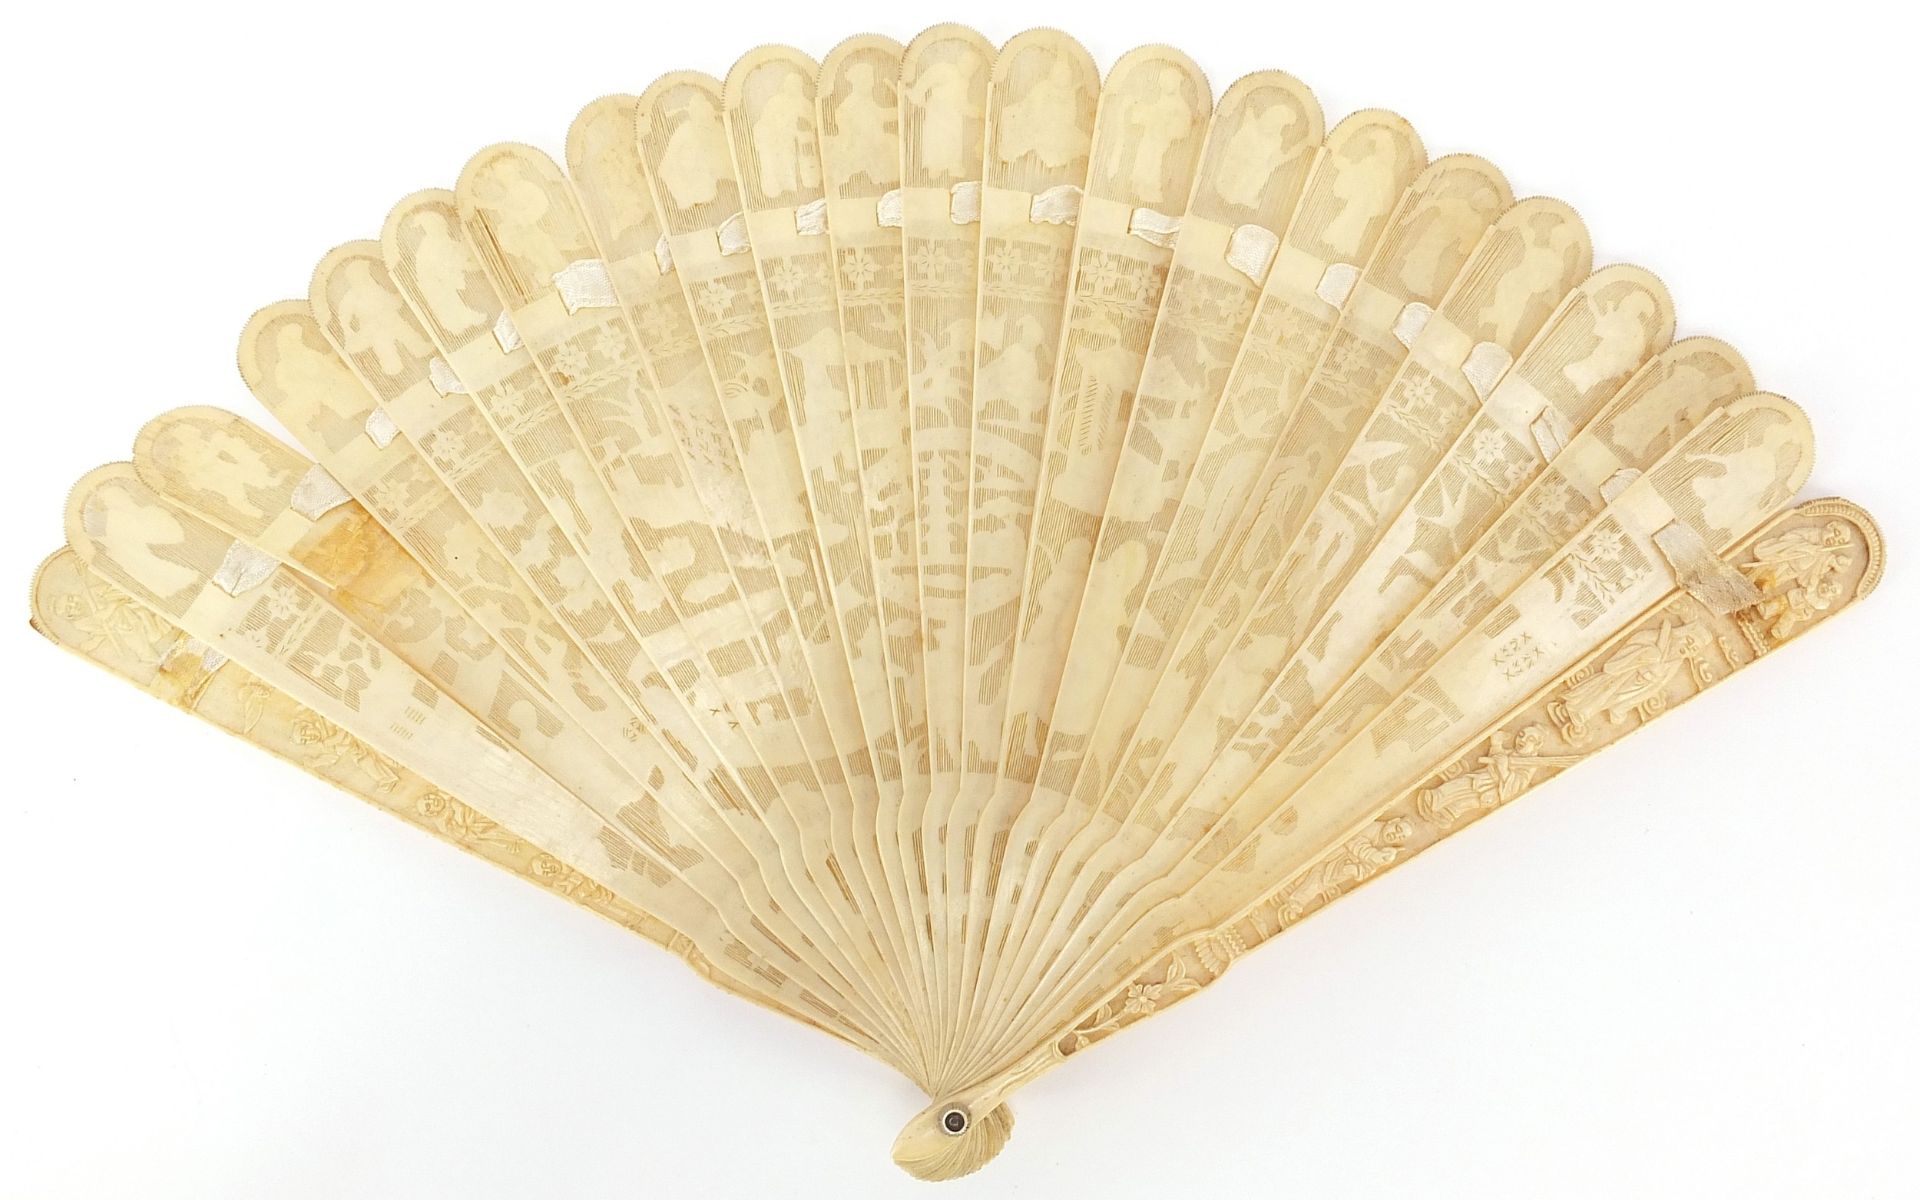 Chinese Canton ivory brise fan carved with figures amongst pagodas and in boats, 18cm in length when - Image 4 of 6